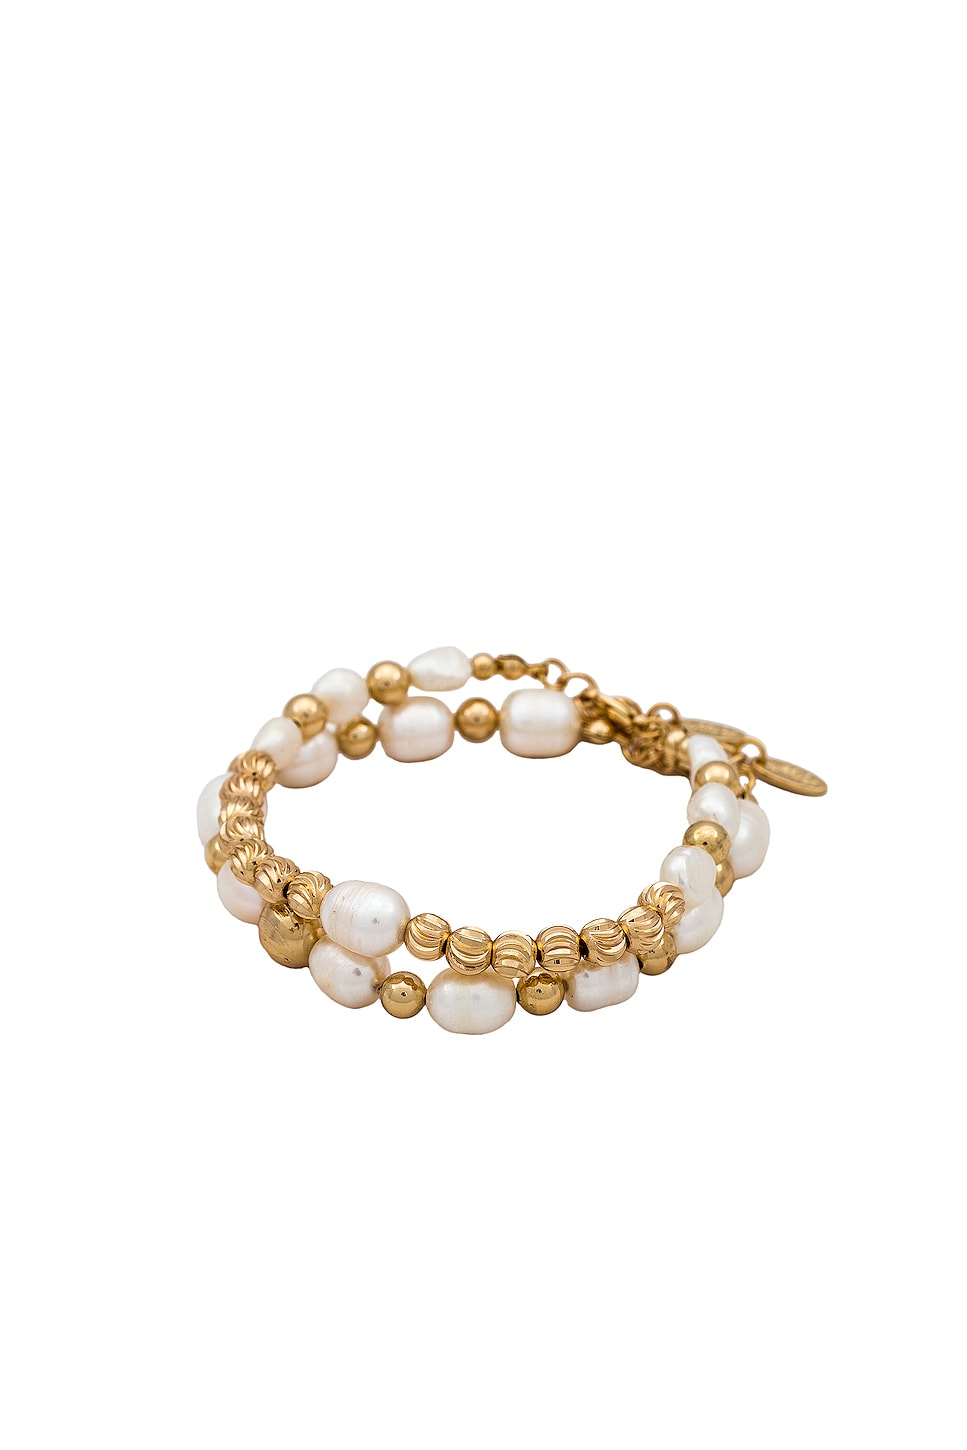 Pearl and leather adjustable bracelet - Nest Pretty Things